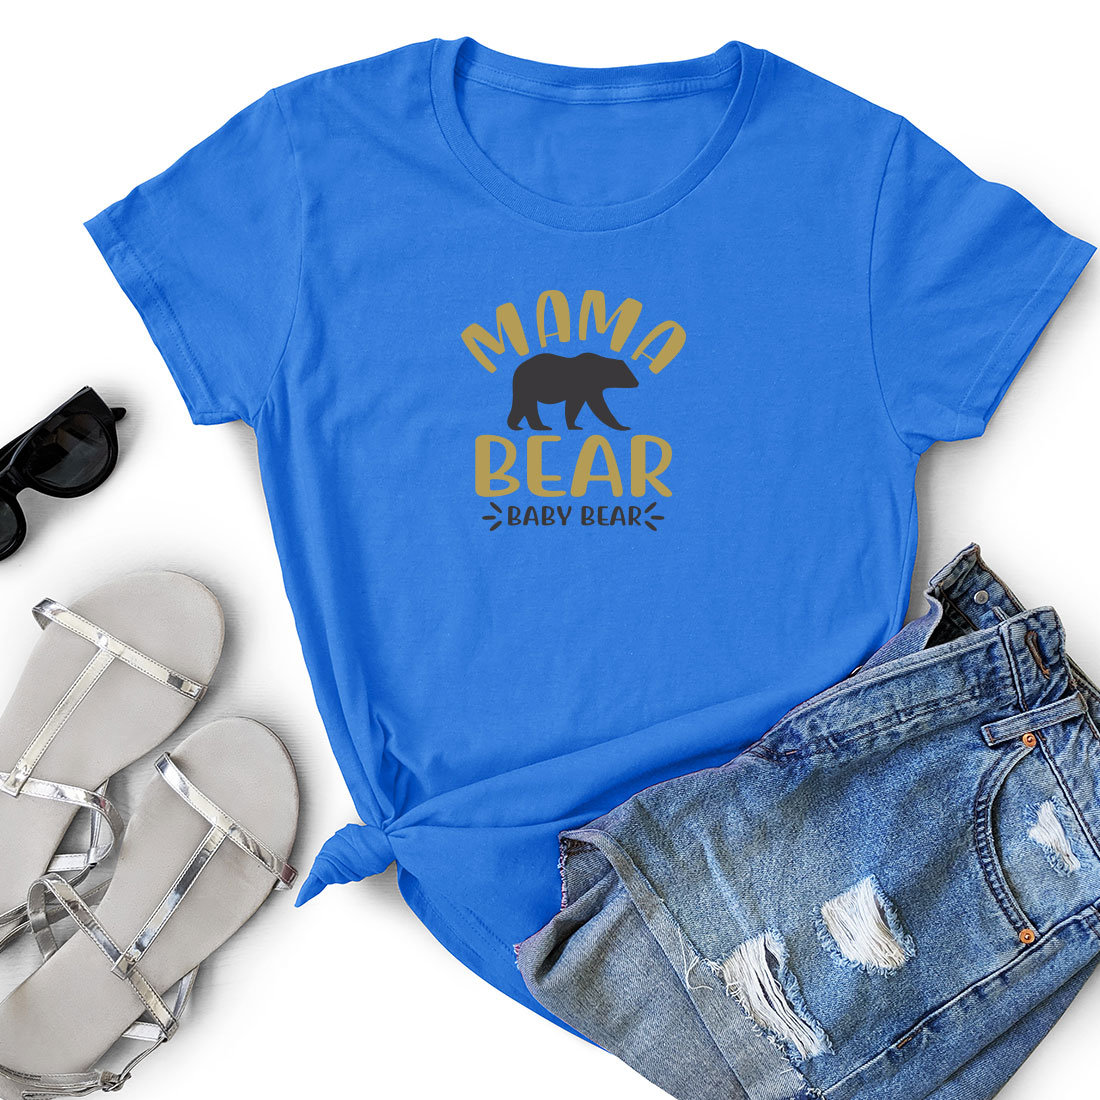 Blue shirt with a bear on it next to a pair of shorts.